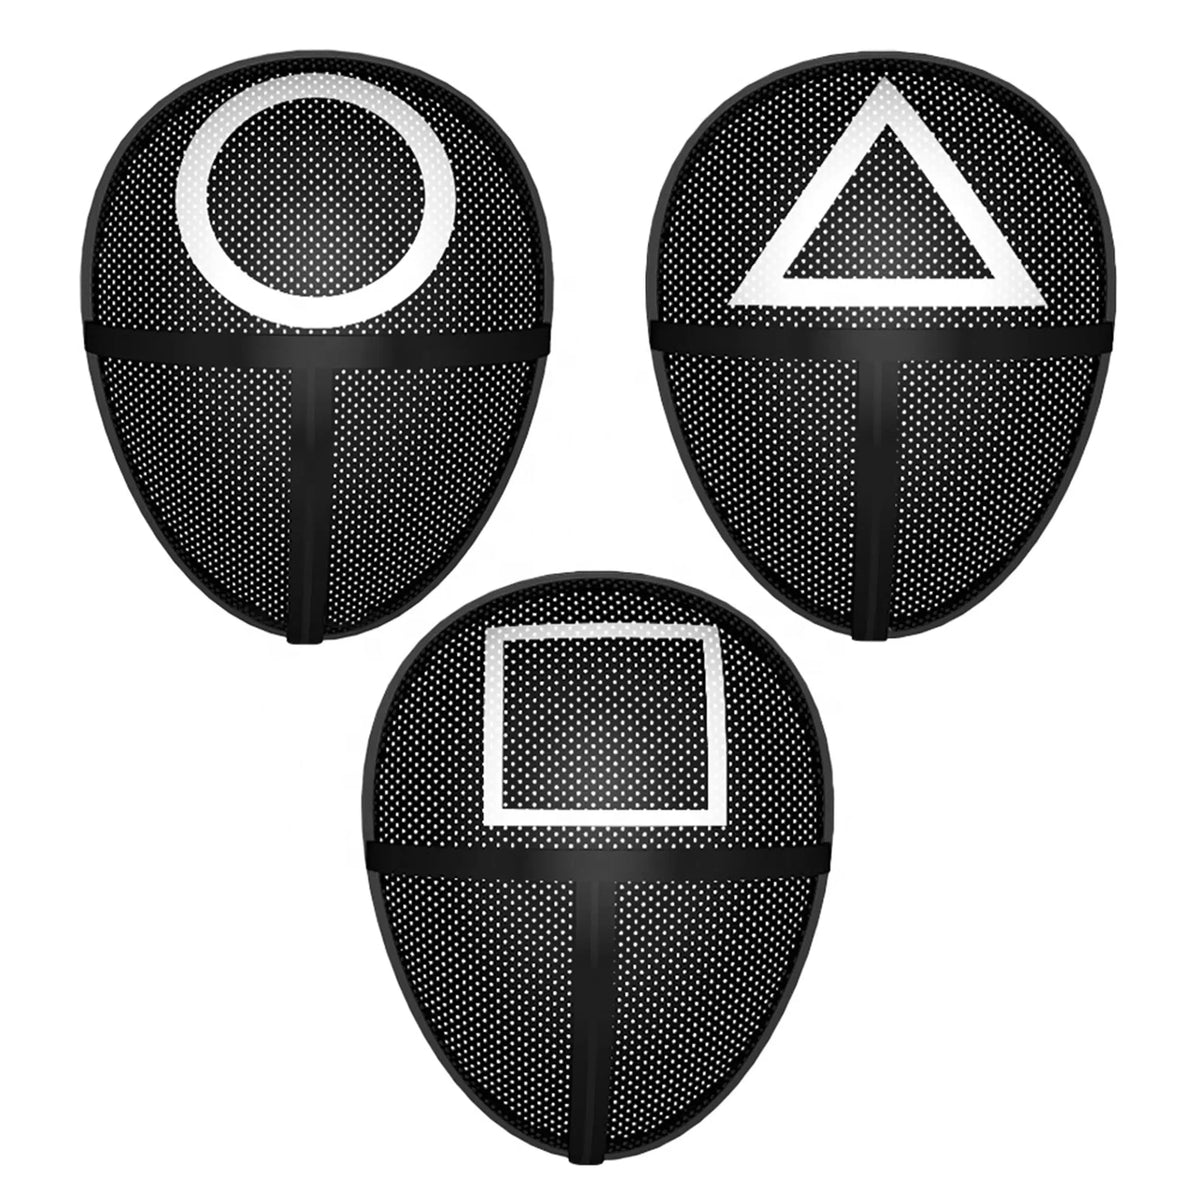 3 different mesh face masks. One with triangle, circle, and square